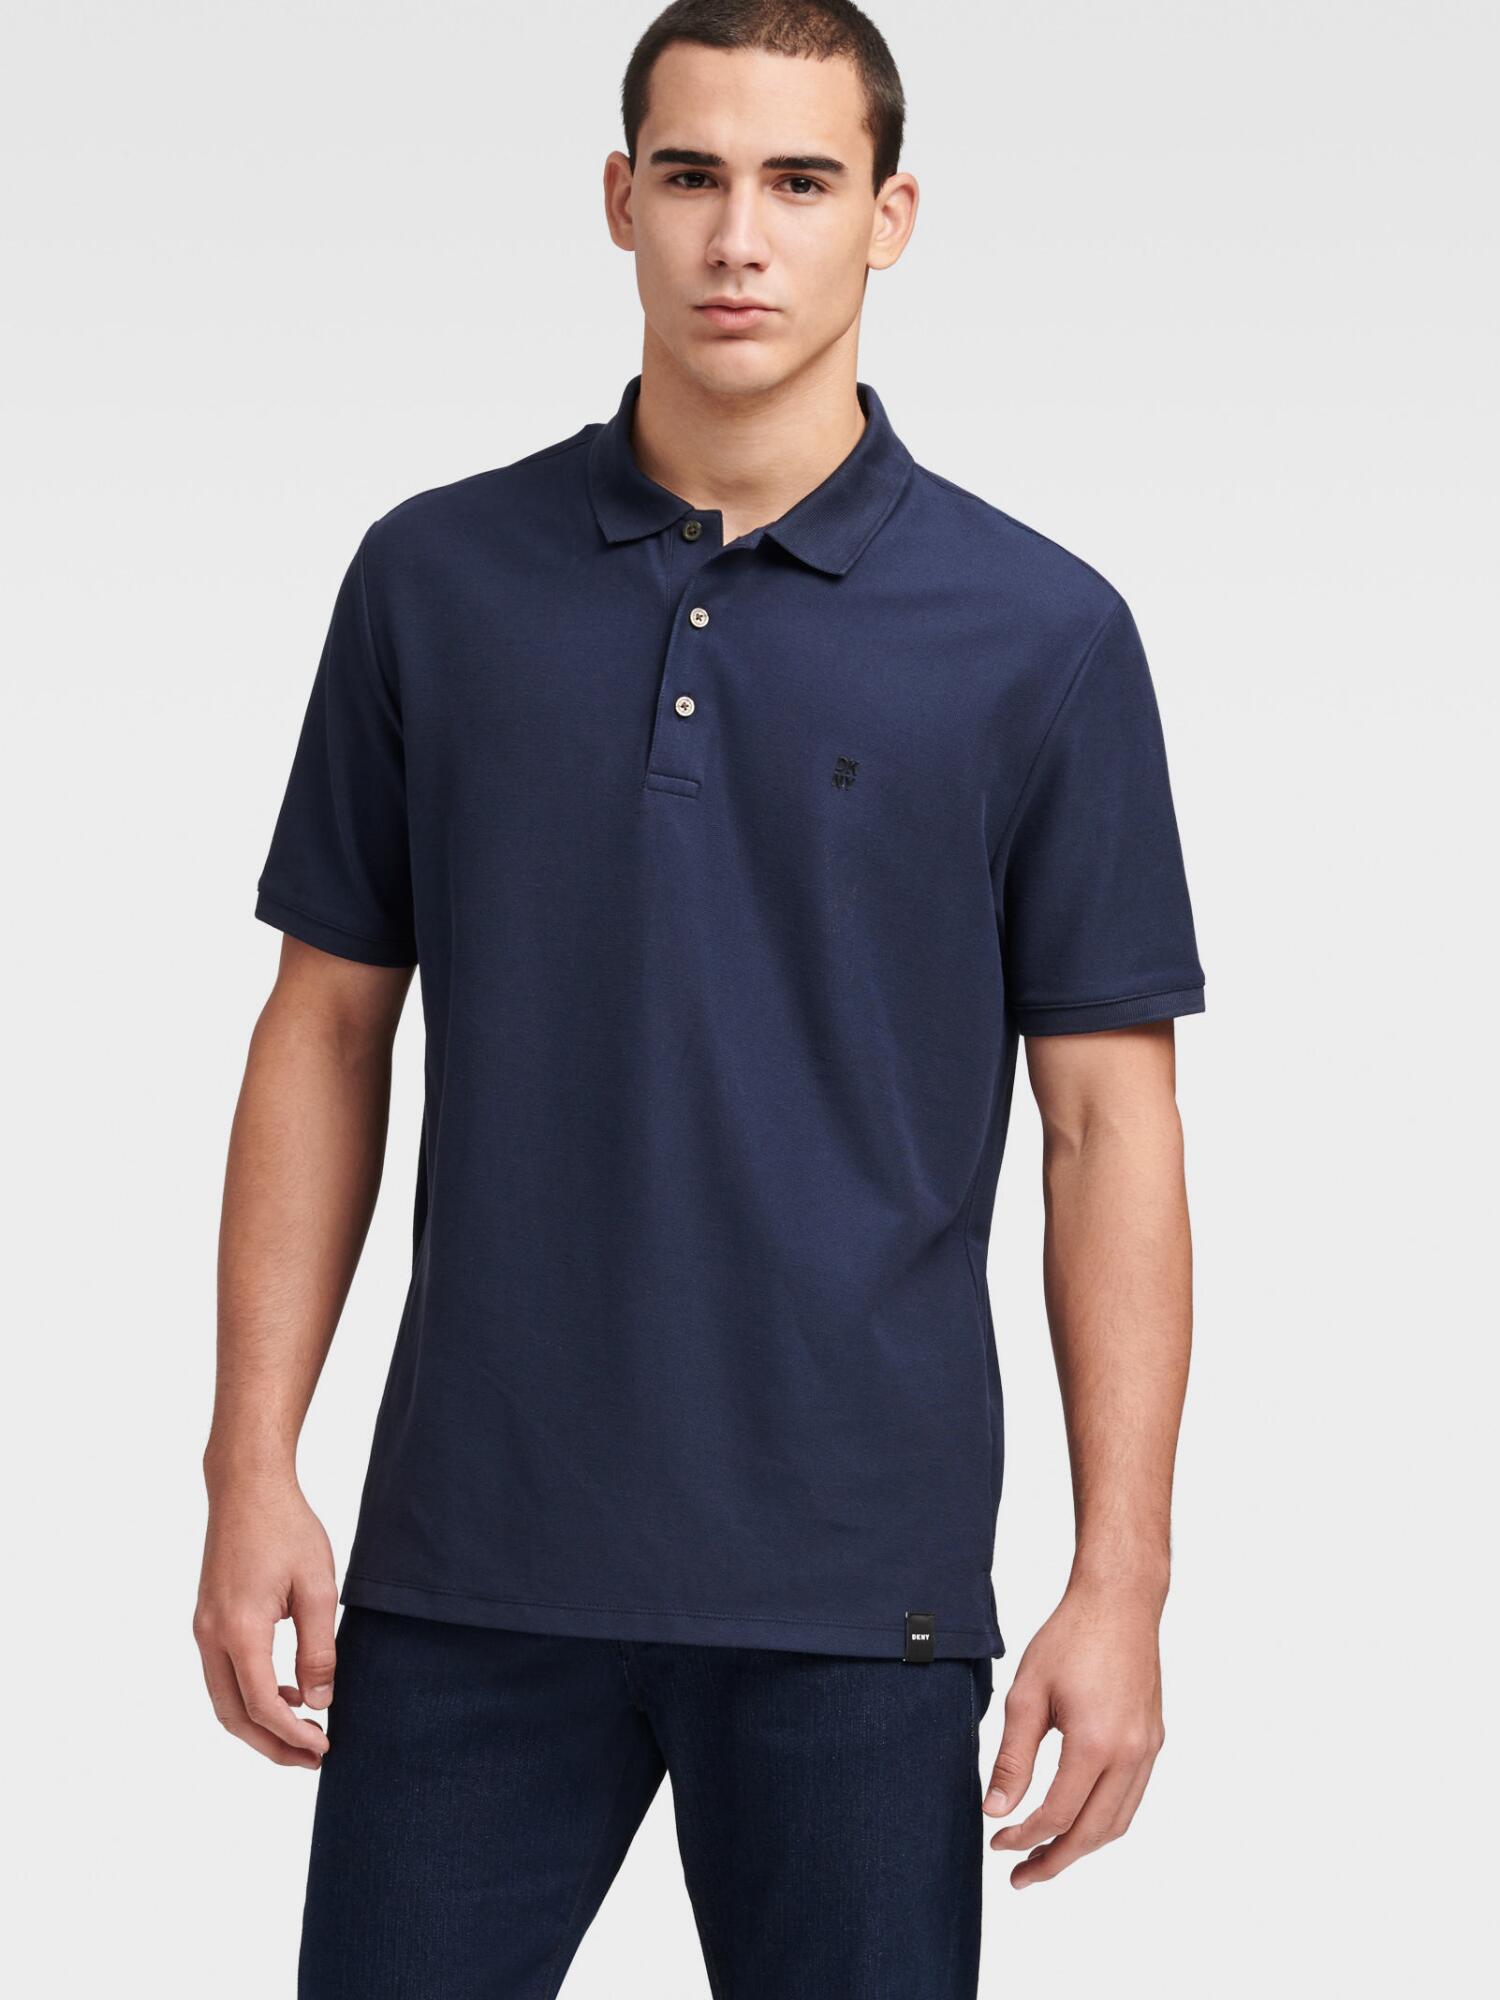 DKNY Cotton Stacked-logo Polo in Navy (Blue) for Men - Save 25% - Lyst